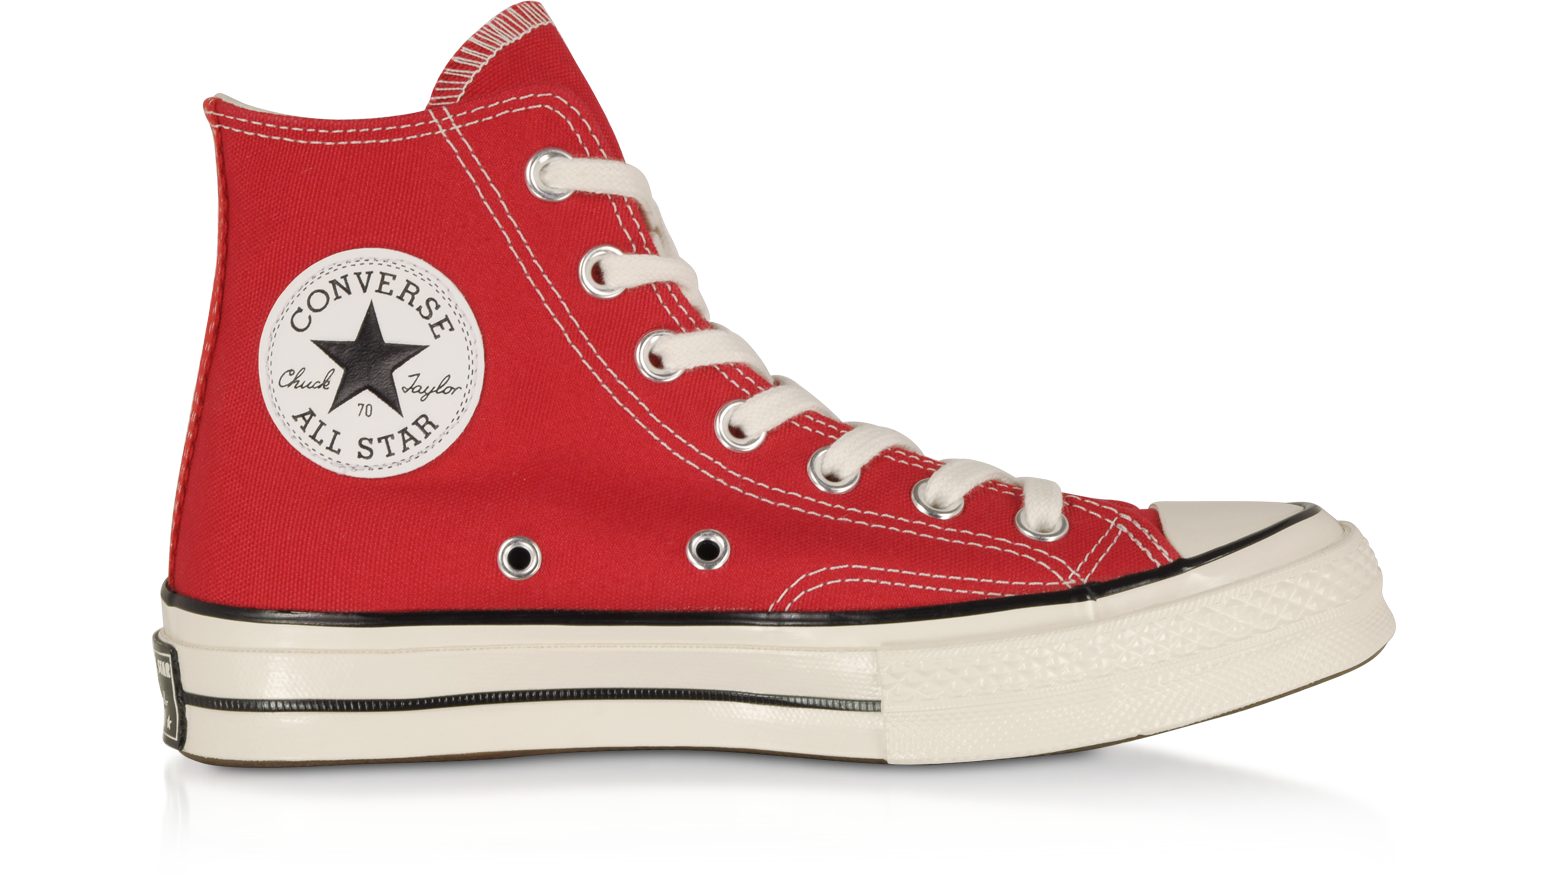 converse red high tops mens